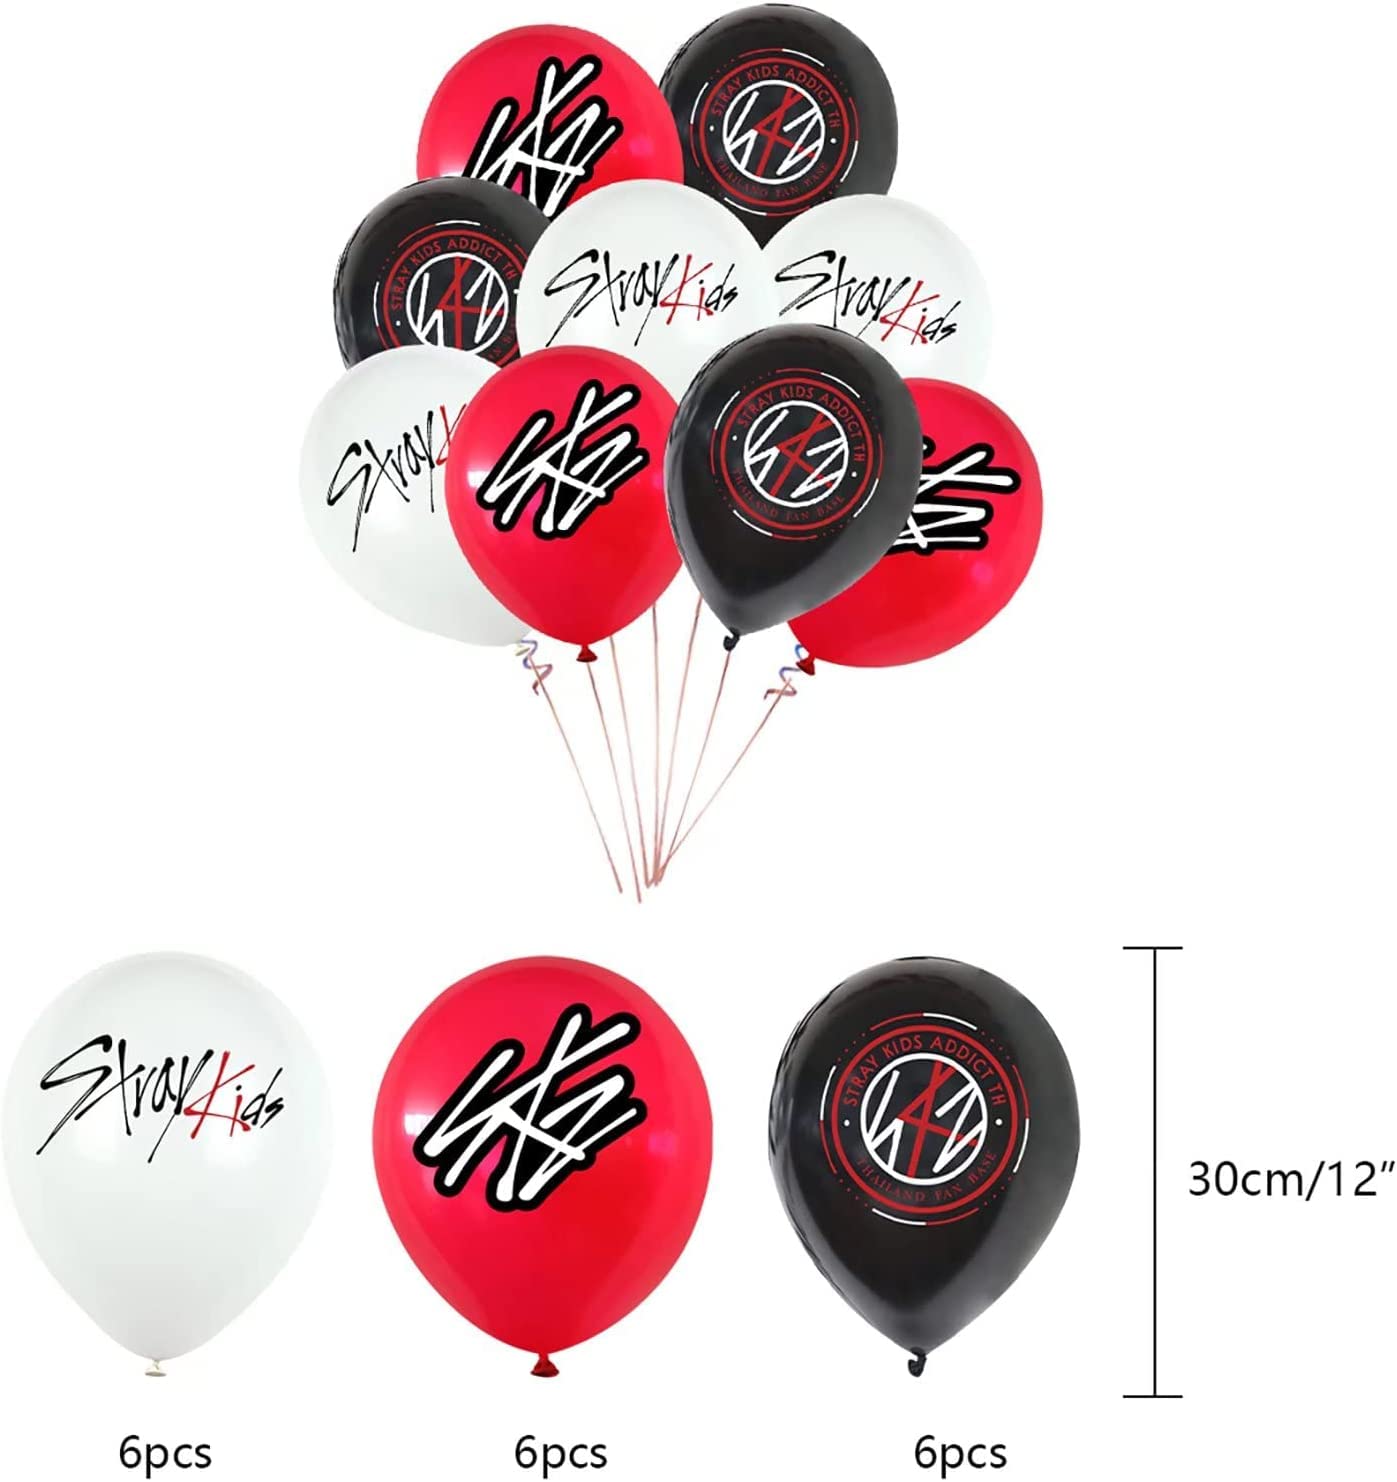 Stray Kids party decoration package